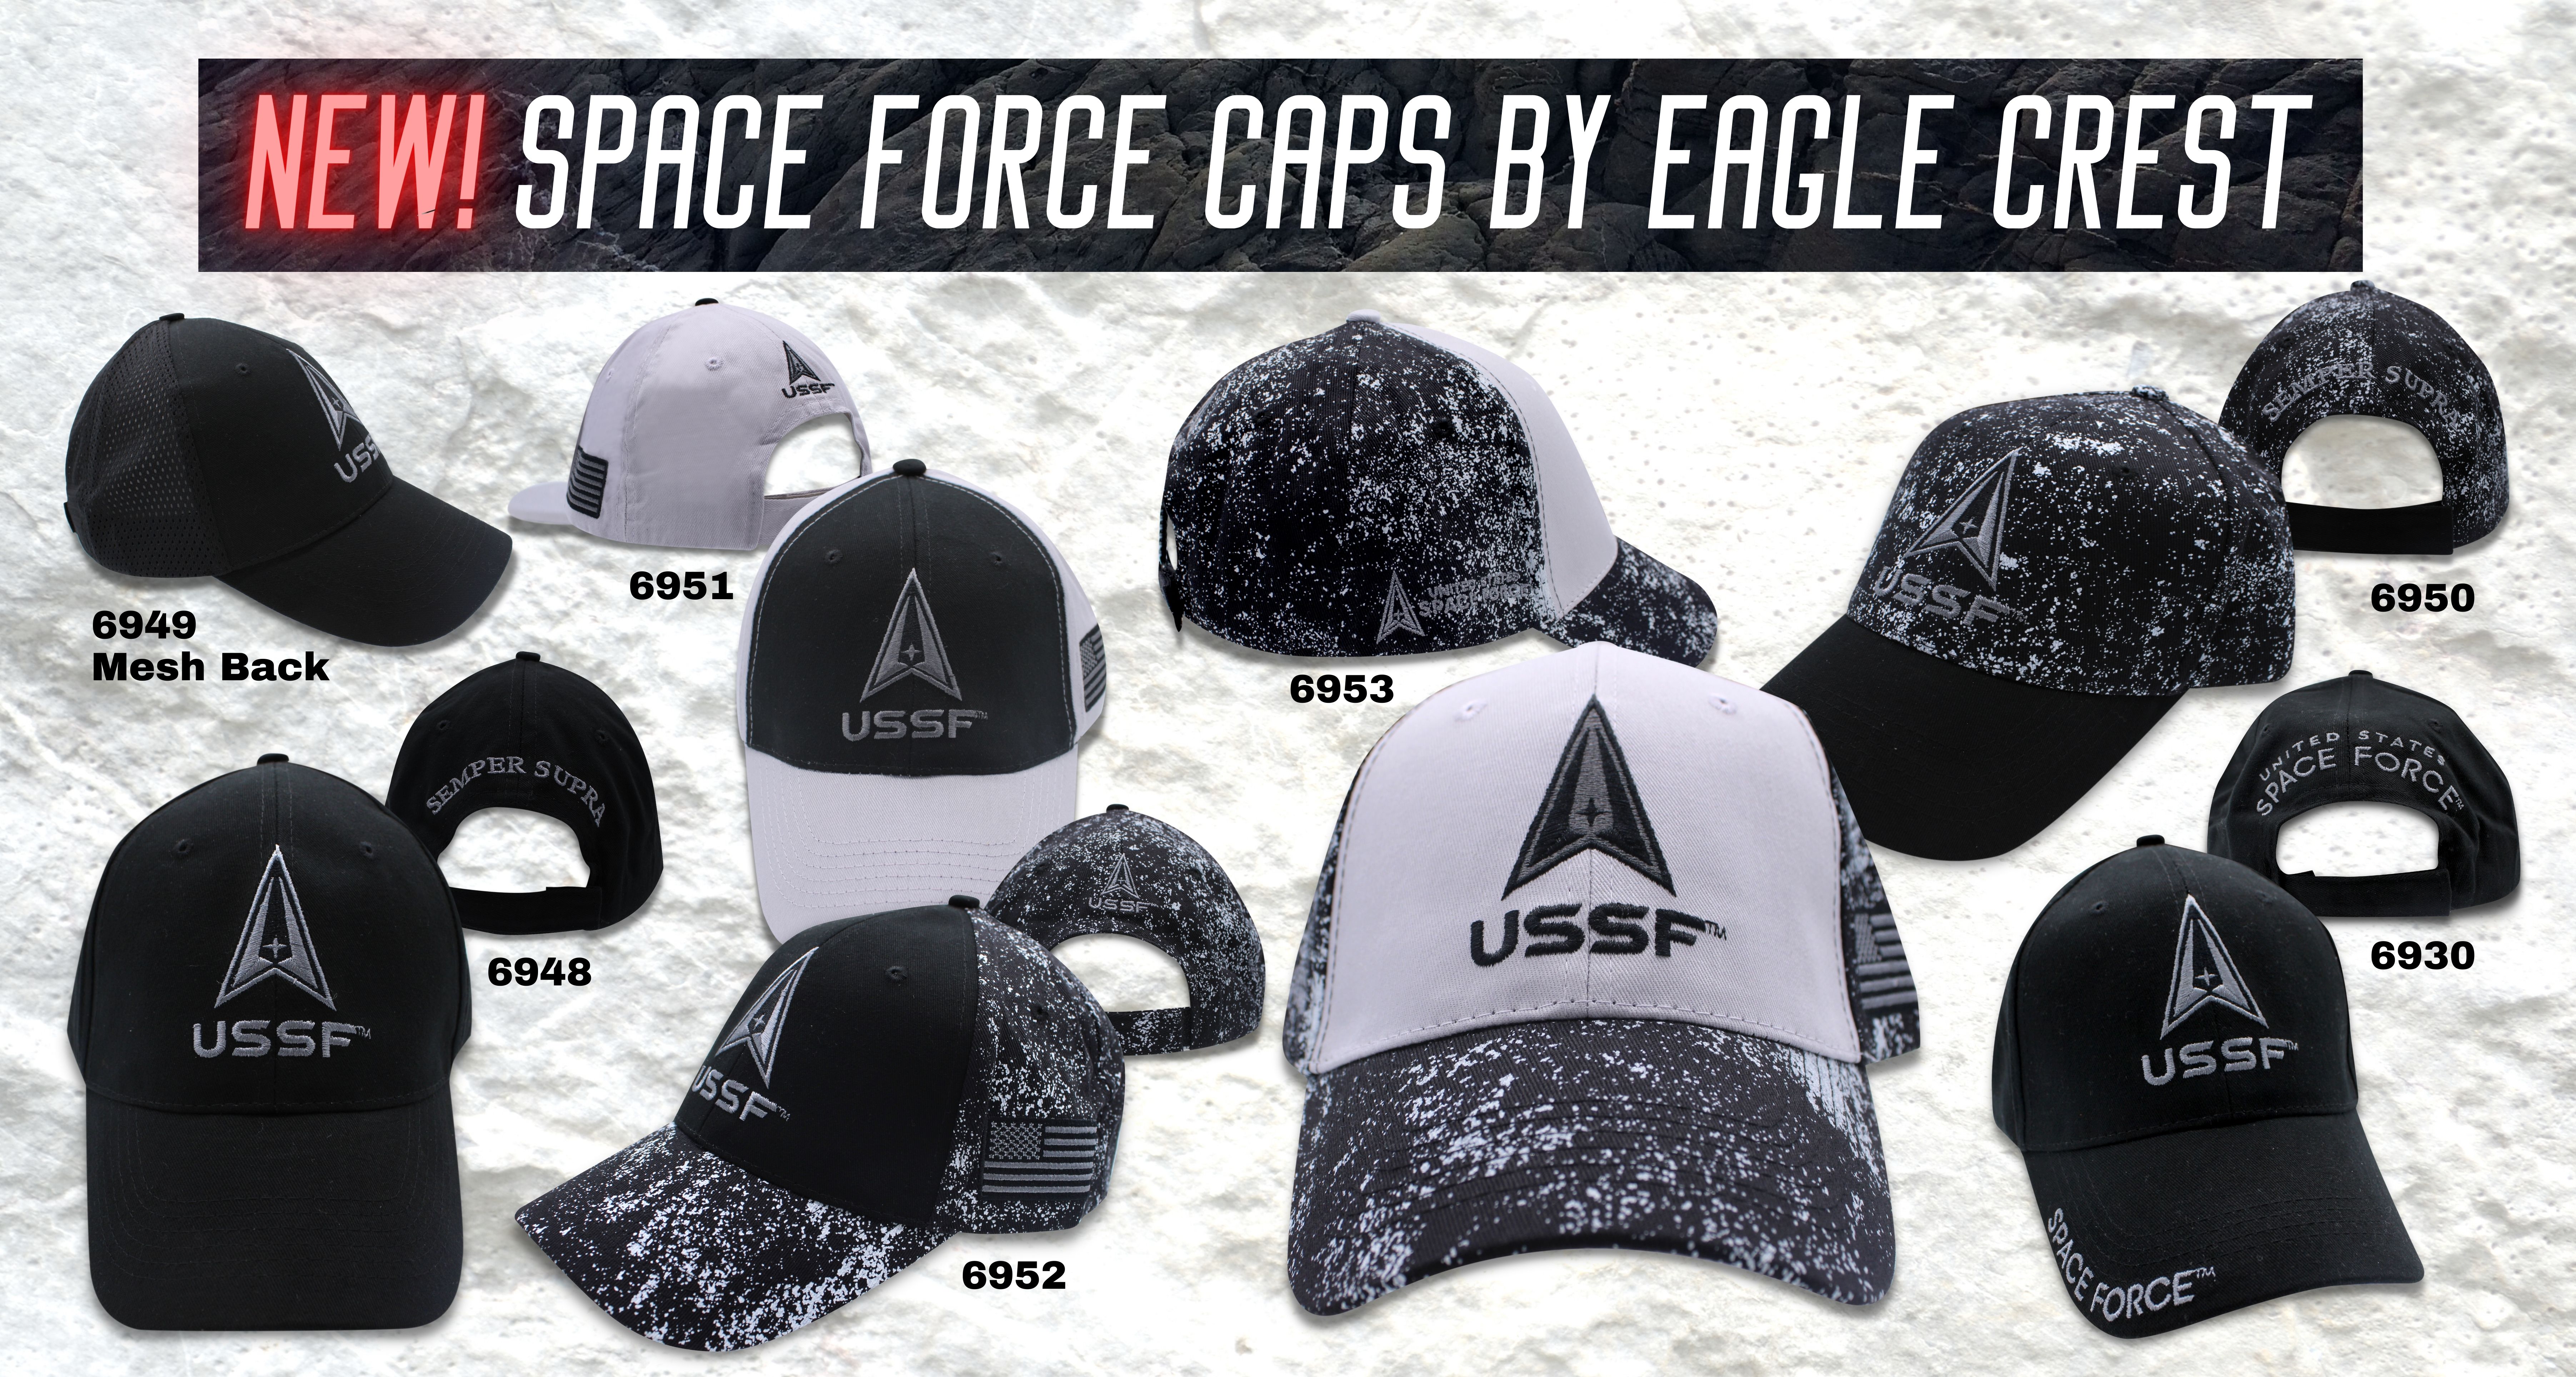 NEW Space Force Caps by Eagle Crest